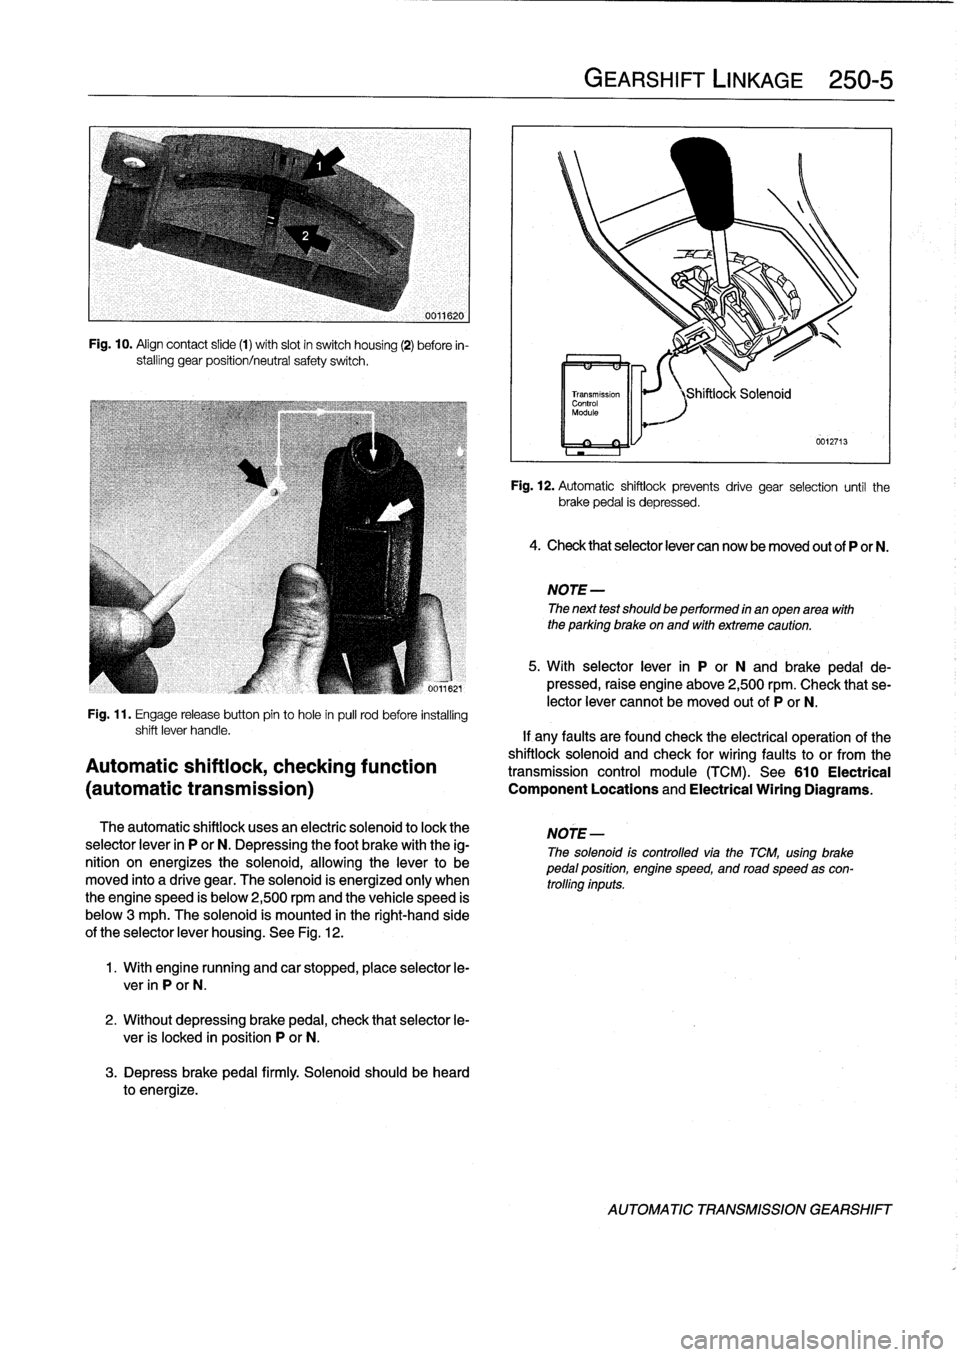 BMW M3 1998 E36 Workshop Manual 
Fig
.
10
.
Align
contact
slide
(1)
with
slot
in
switch
housing
(2)
before
in-
stalling
gear
position/neutral
safety
switch
.

Fig
.
11
.
Engage
release
button
pin
to
hole
in
pull
rod
before
installin